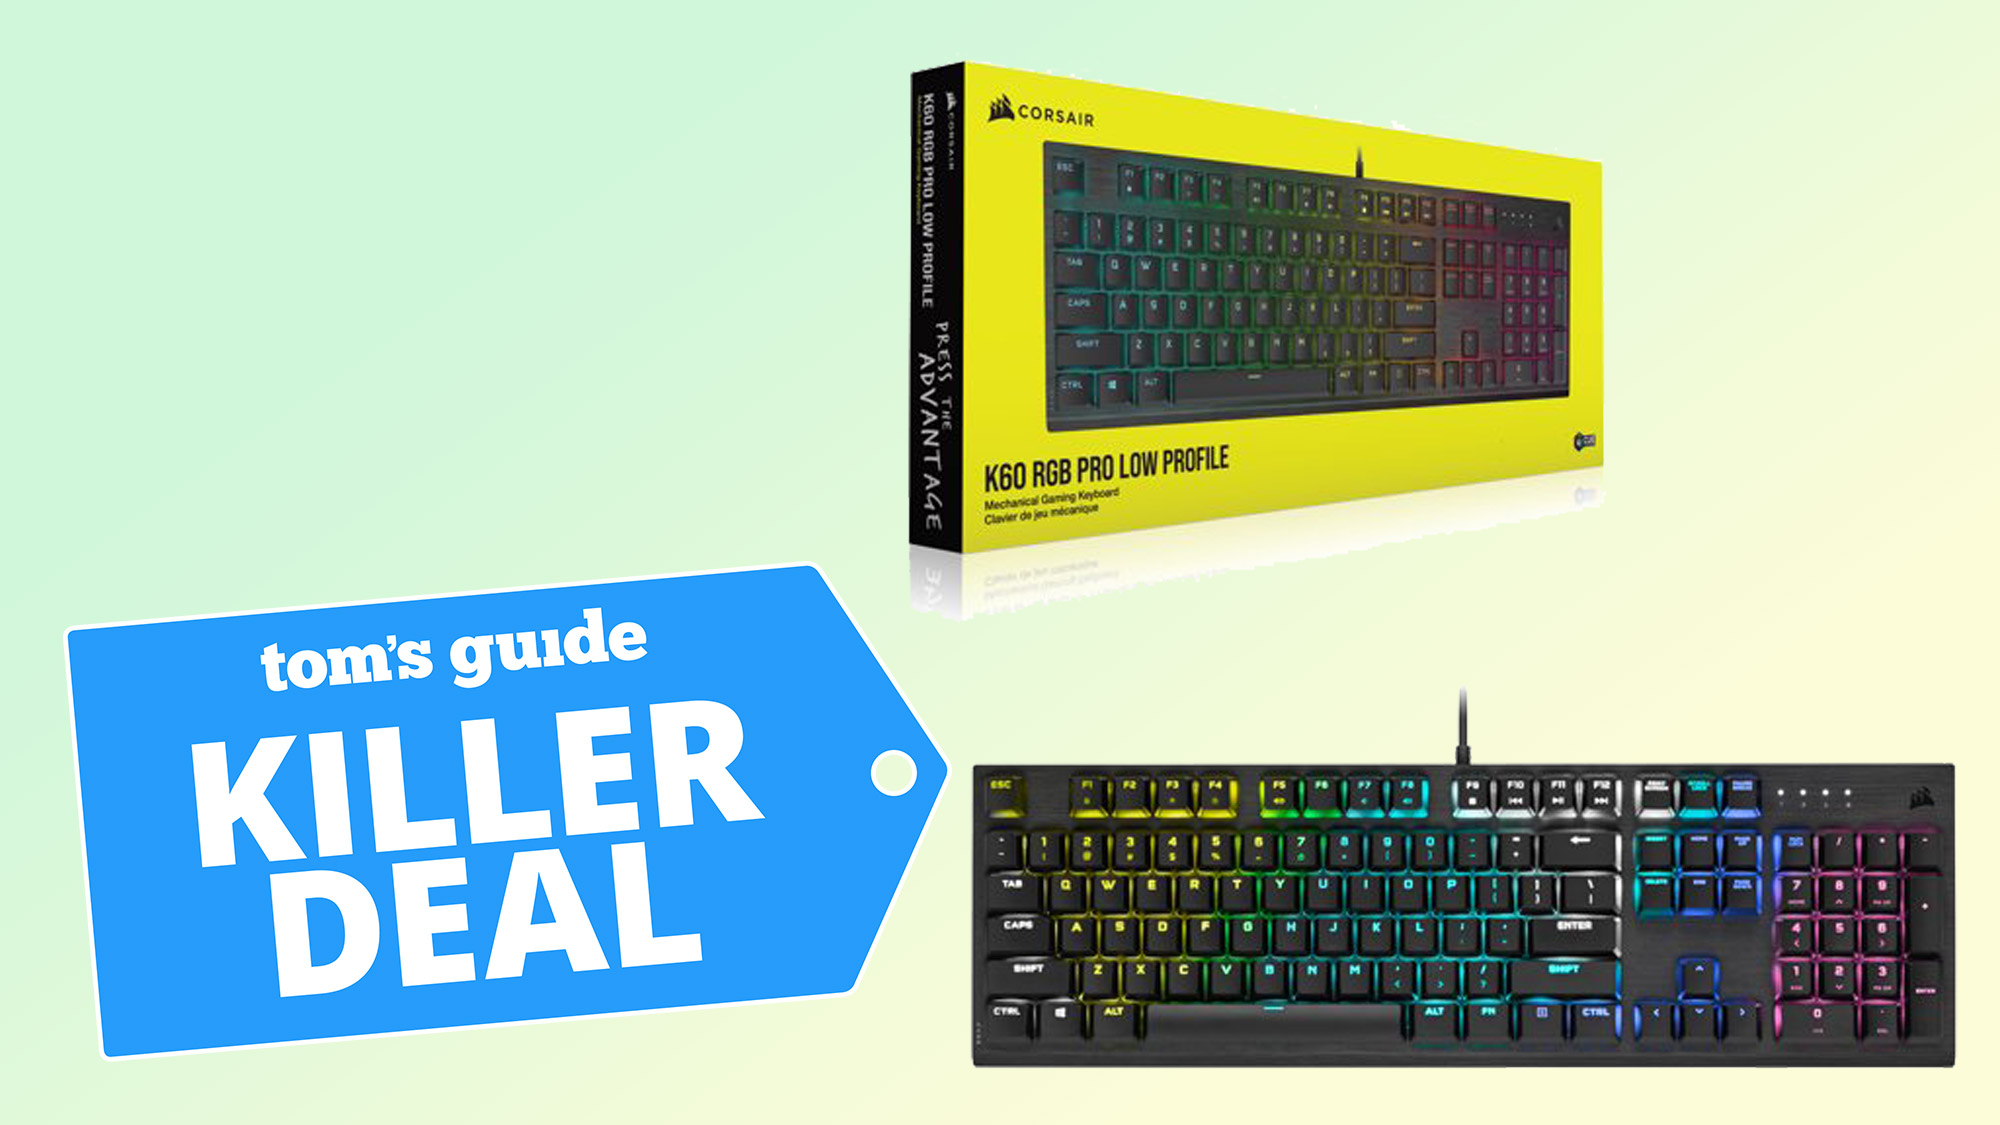 Black Friday headers with product shots of the Corsair K60 RGB Pro Low Profile Mechanical Gaming Keyboard.